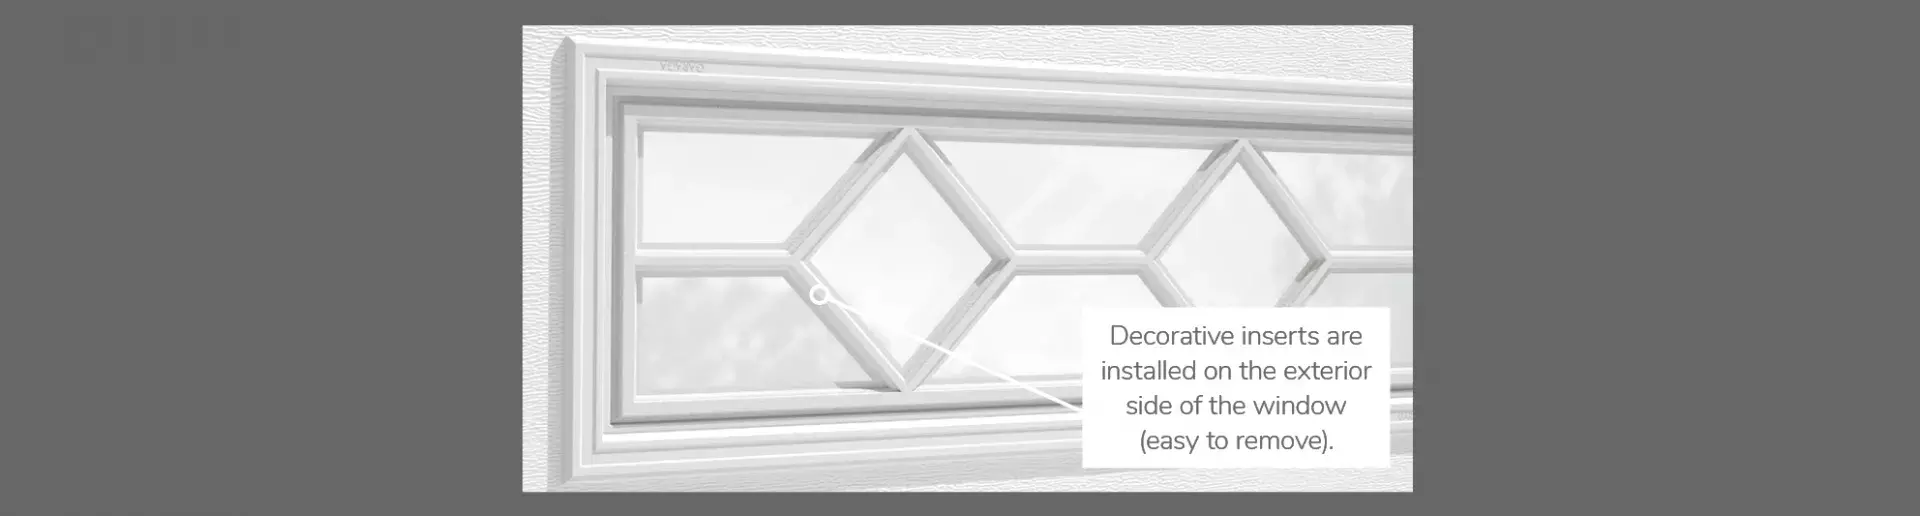 Waterton Decorative Insert, 40" x 13" or 41" x 16", available for door R-16, 3 layers - Polystyrene, 2 layers - Polystyrene and Non-insulated